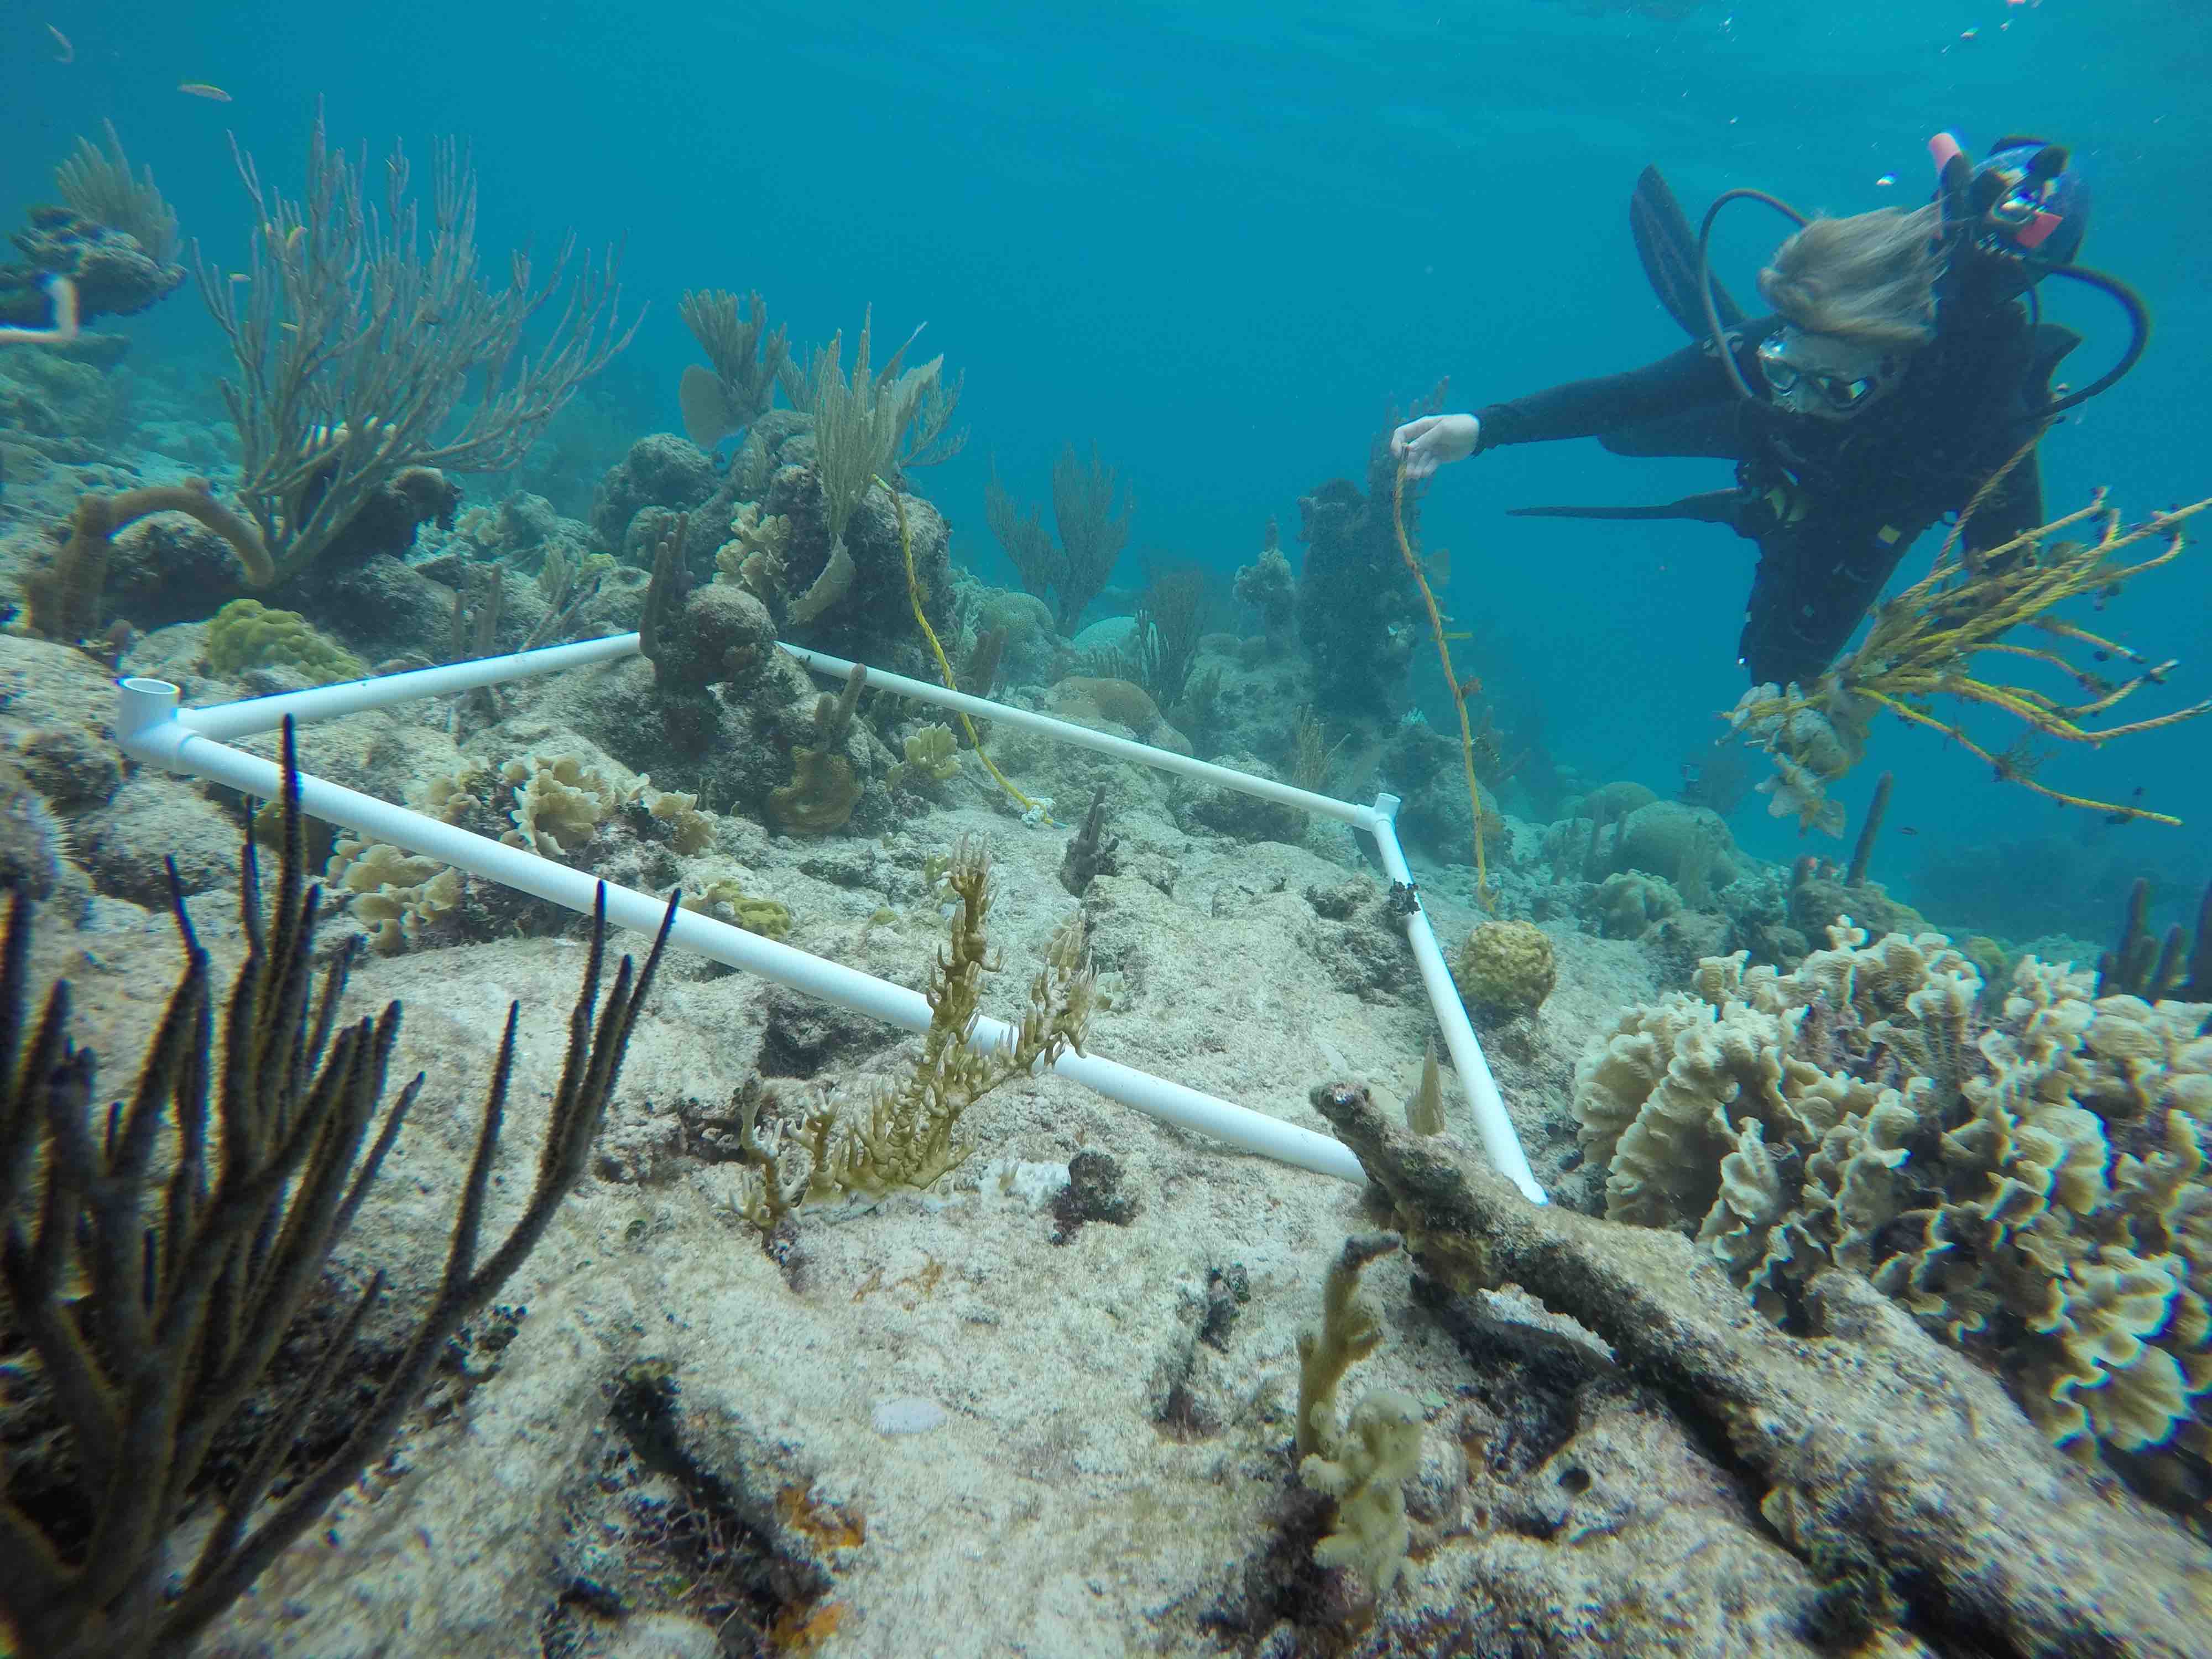 Quantifying benthic cover and herbivory at Carrie Bow Cay, Belize